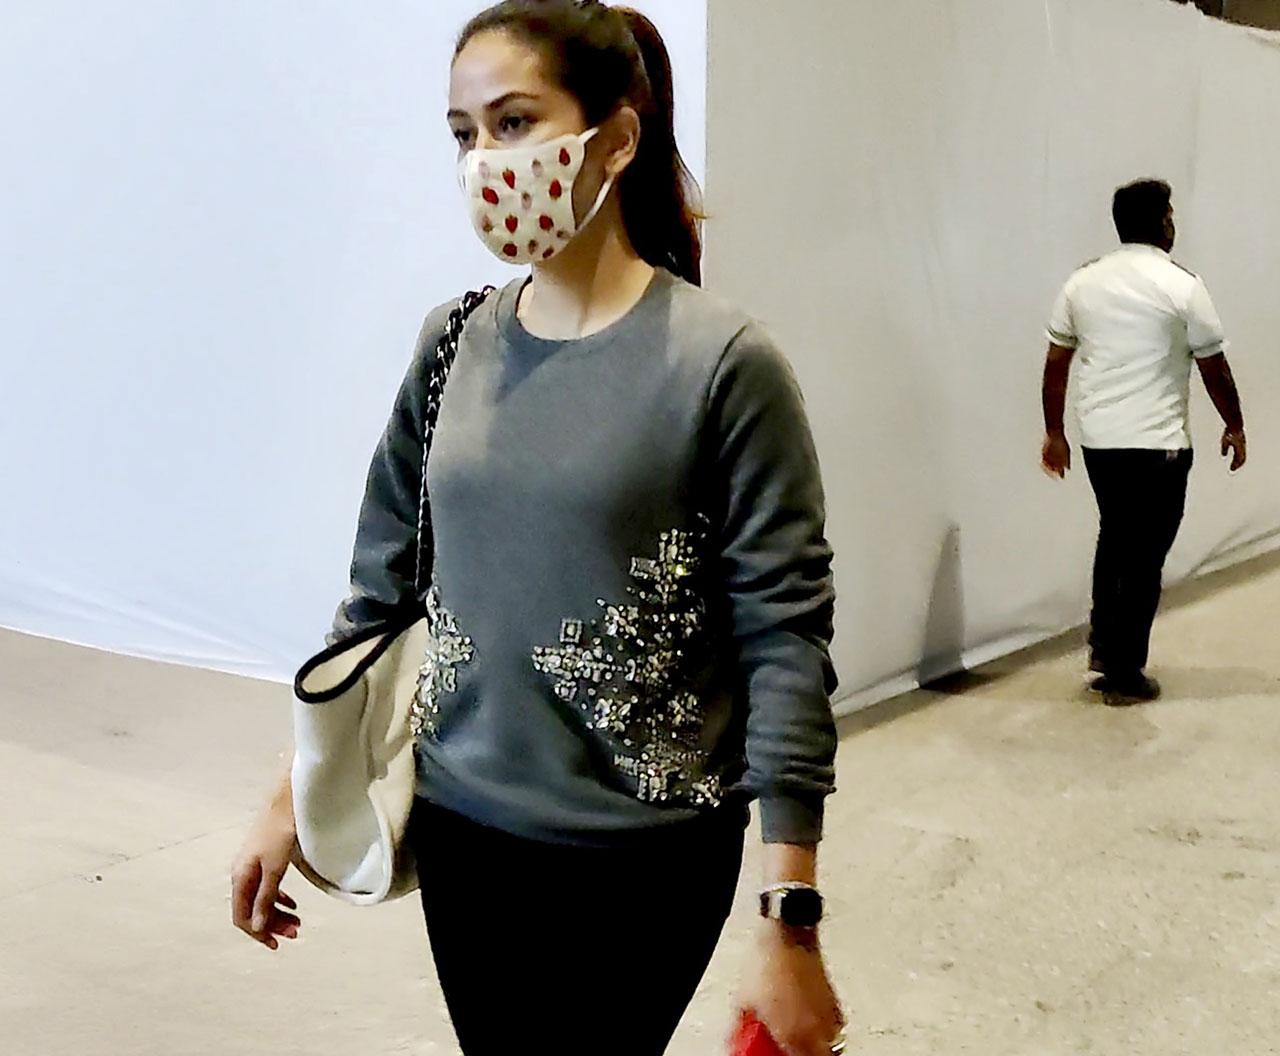 Shahid Kapoor's wife Mira Rajput Kapoor was also spotted at the Mumbai airport.